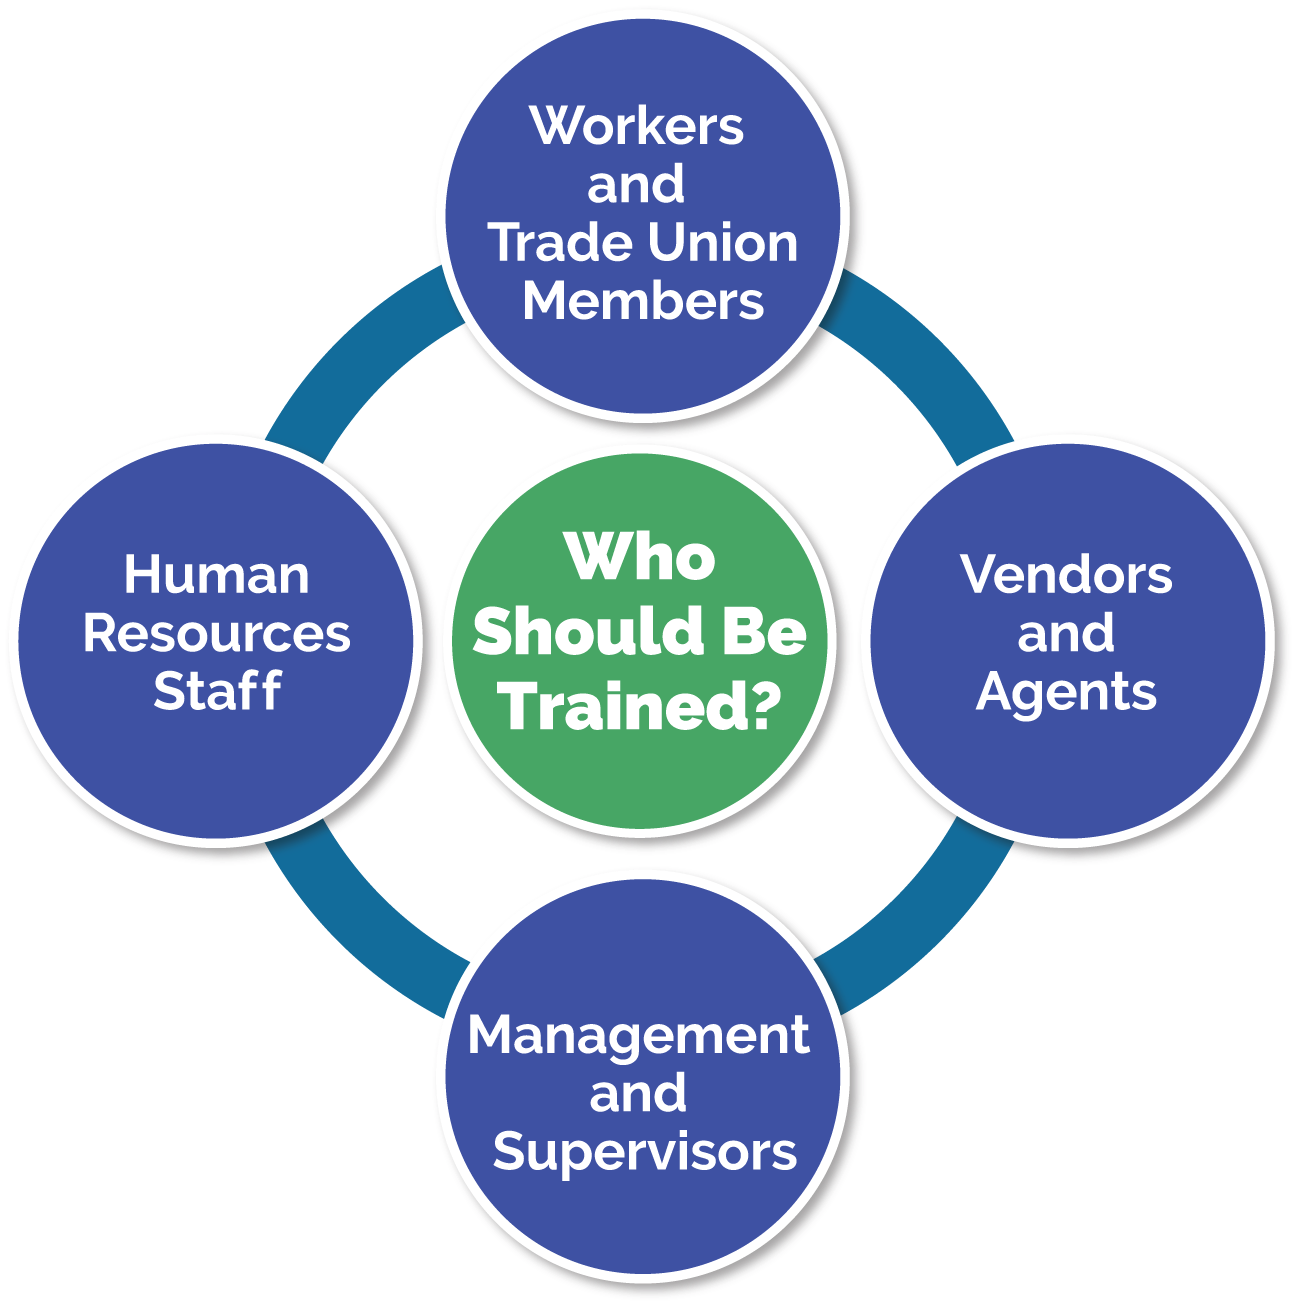 The following stakeholders should receive training: Workers and Trade Unions, Vendors and Agents, Management and Supervisors, and Human Resources Staff